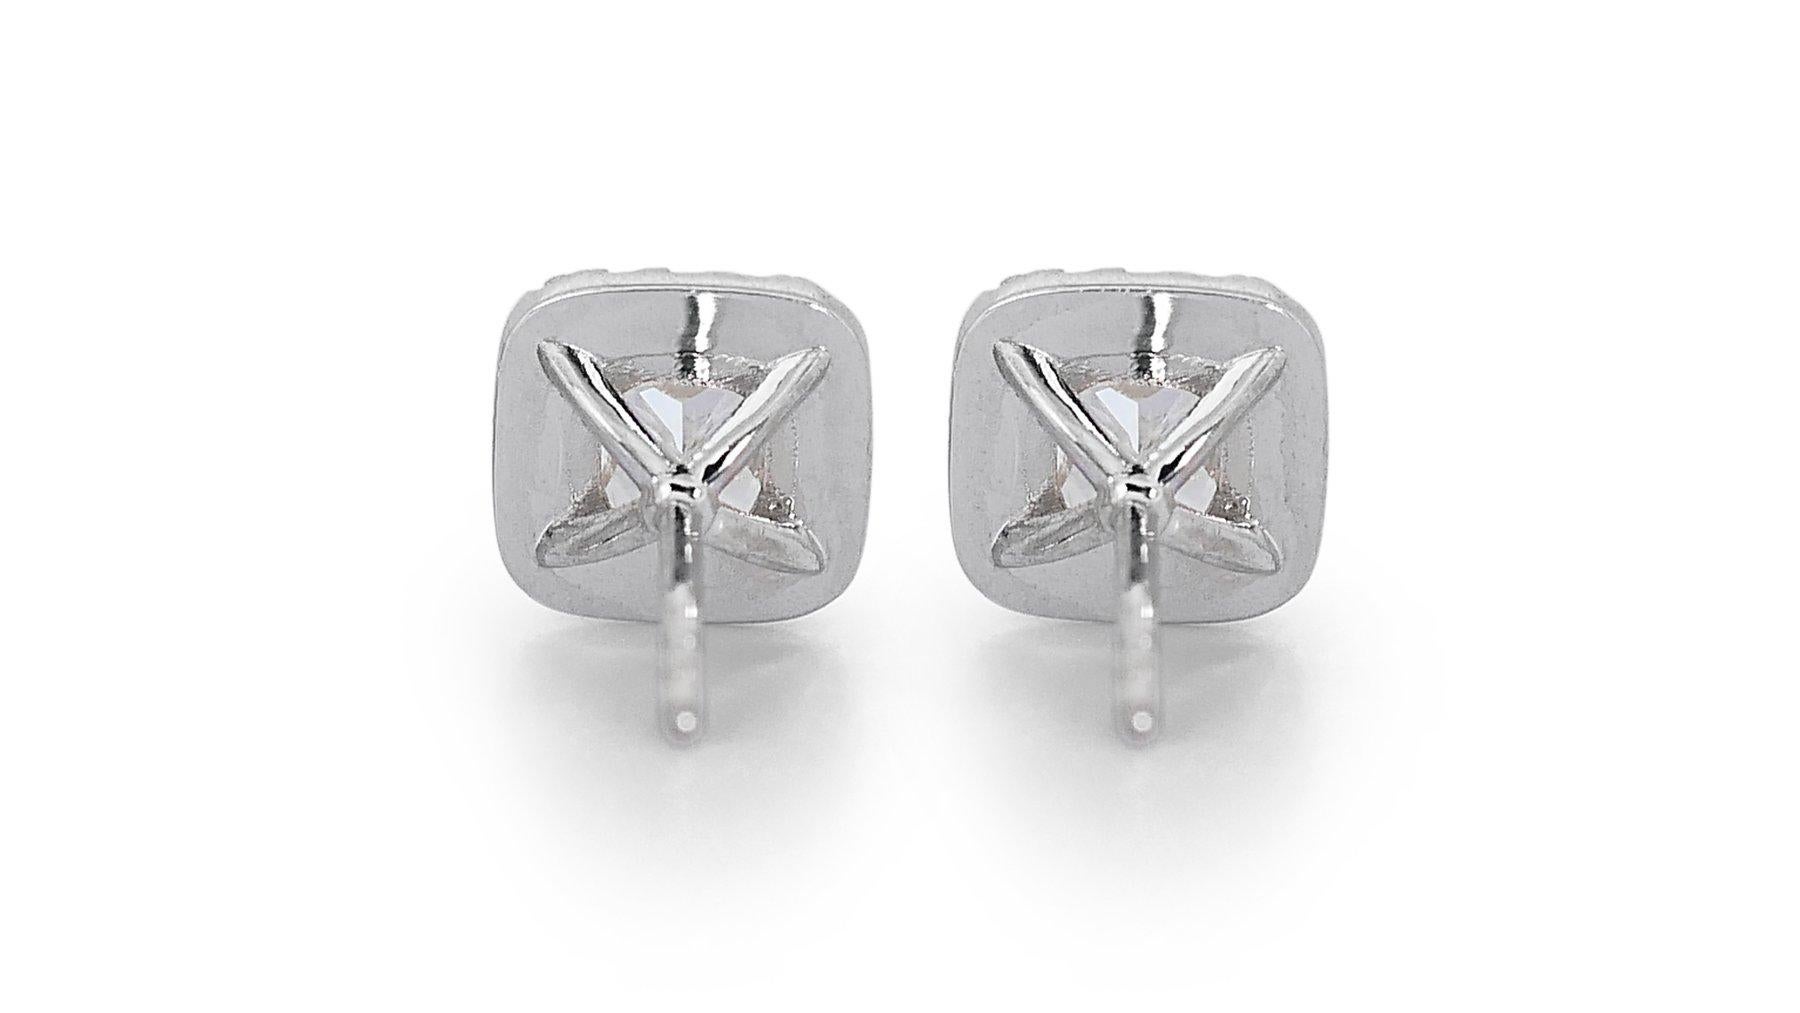 Stunning 2.33ct Diamond Halo Stud Earrings in 18k White Gold - GIA Certified For Sale 2